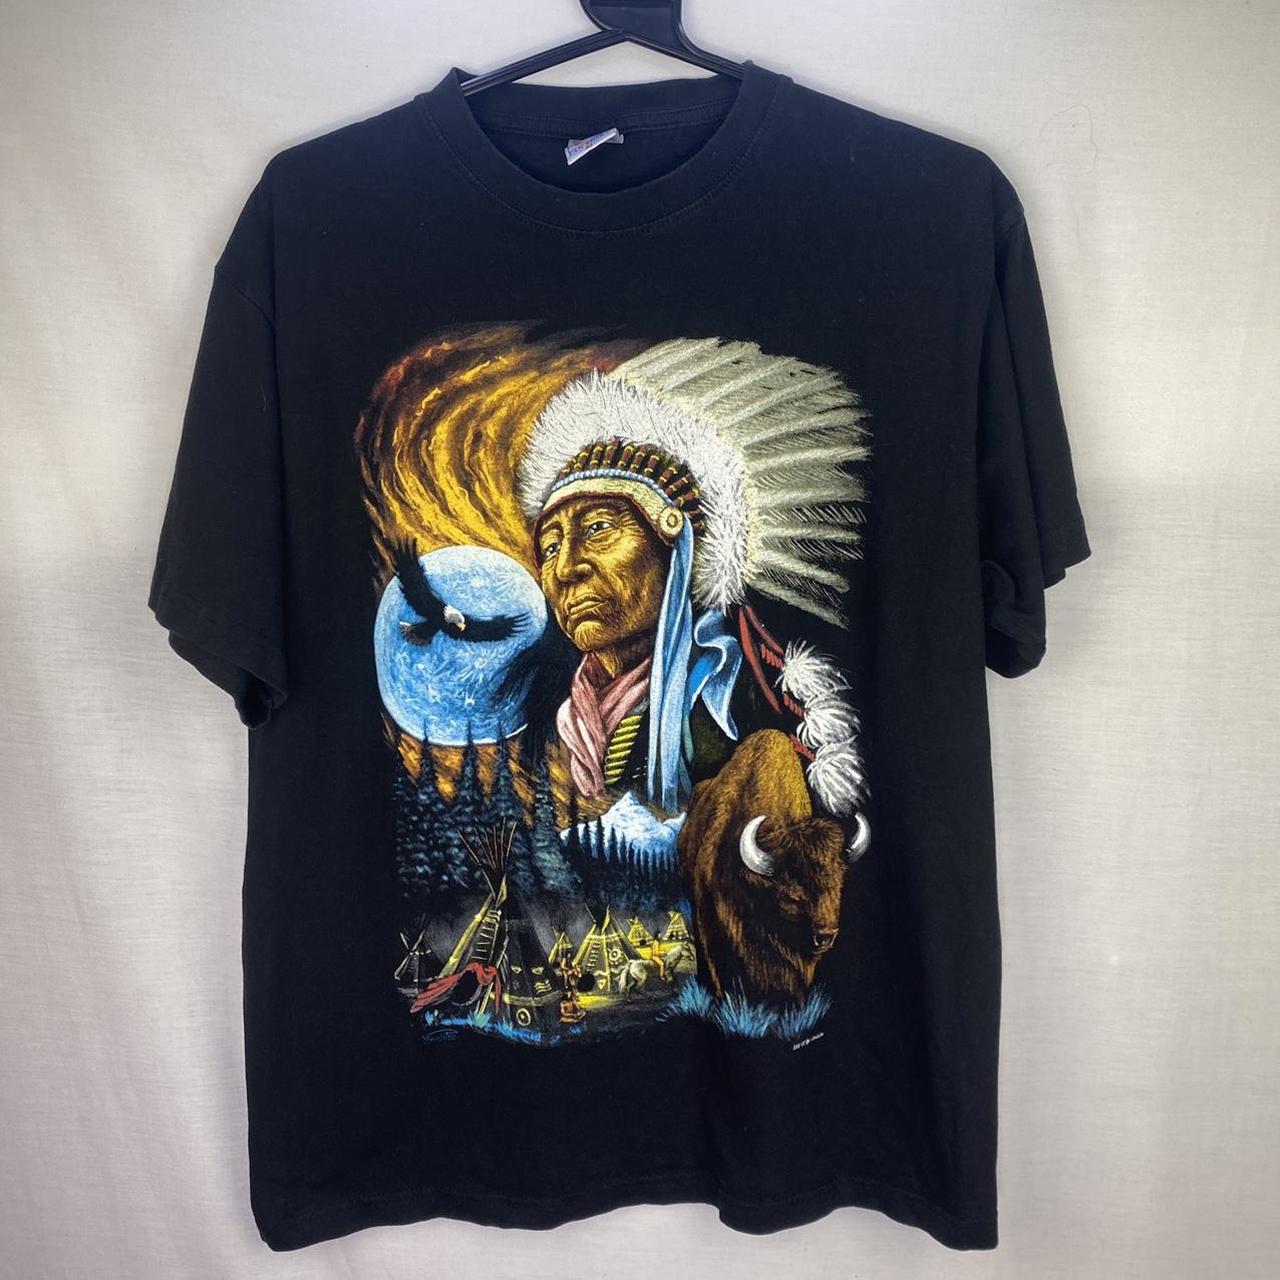 Native American Graphic T-shirt Size... - Depop